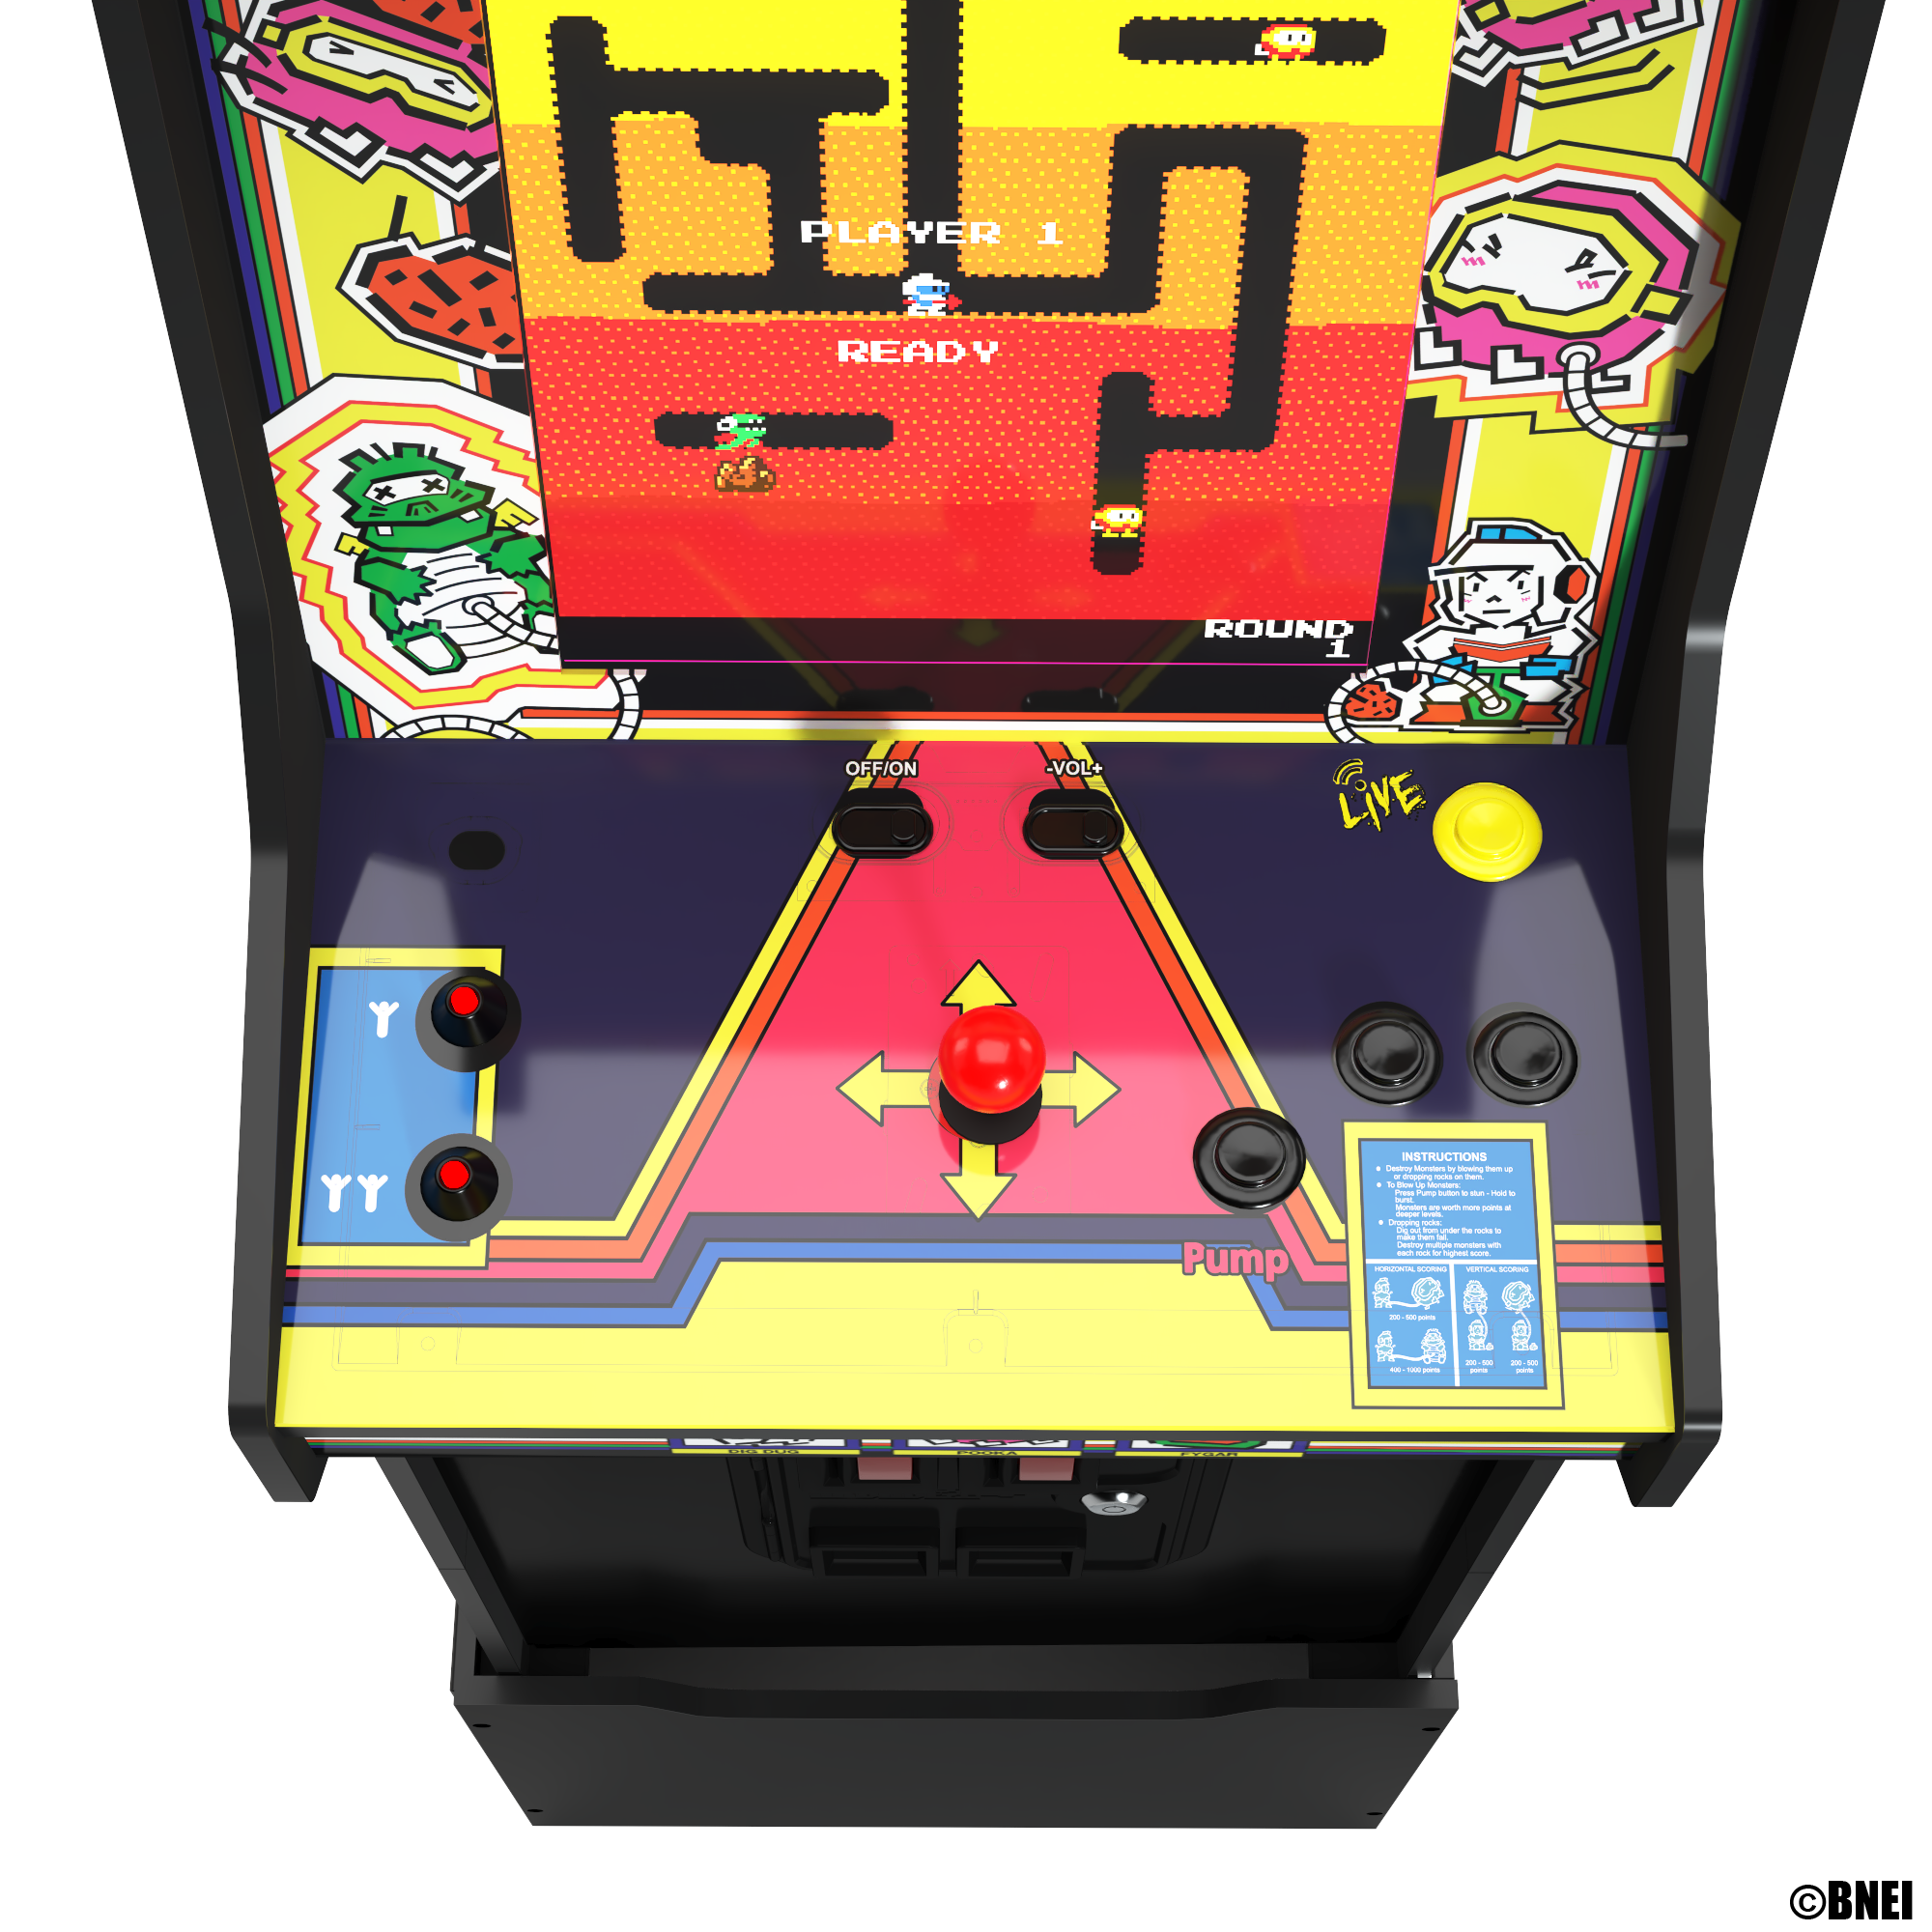 Arcade1Up Dig Dug Bandai Namco Legacy Edition Arcade with Riser and Light-Up Marquee - image 5 of 7